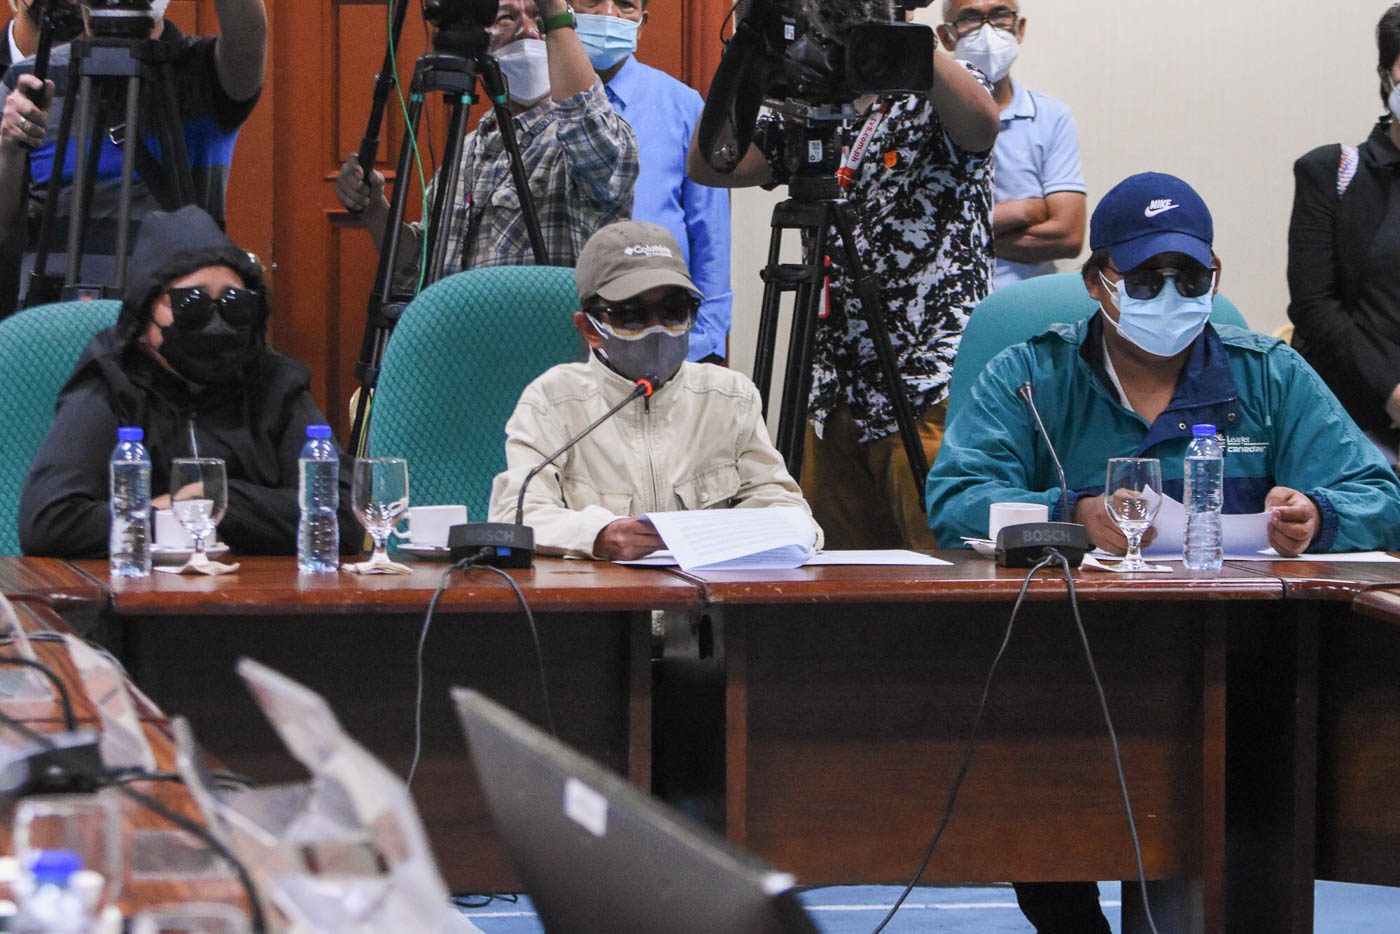 Pastillas 2.0? PH immigration execs allegedly tied to human trafficking in Myanmar